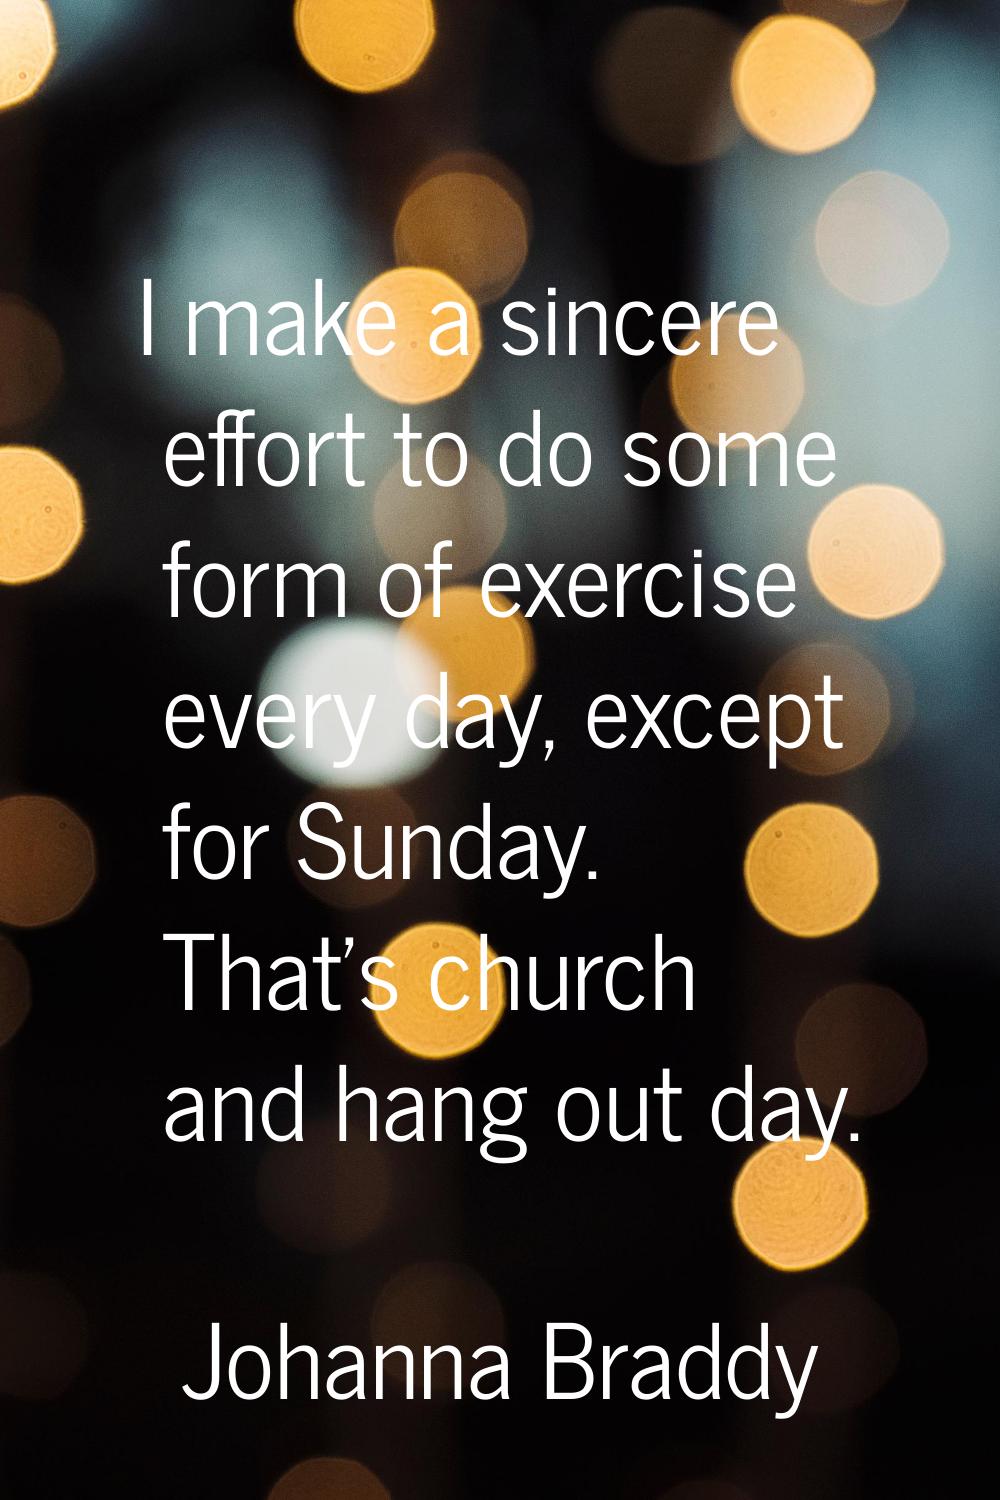 I make a sincere effort to do some form of exercise every day, except for Sunday. That's church and